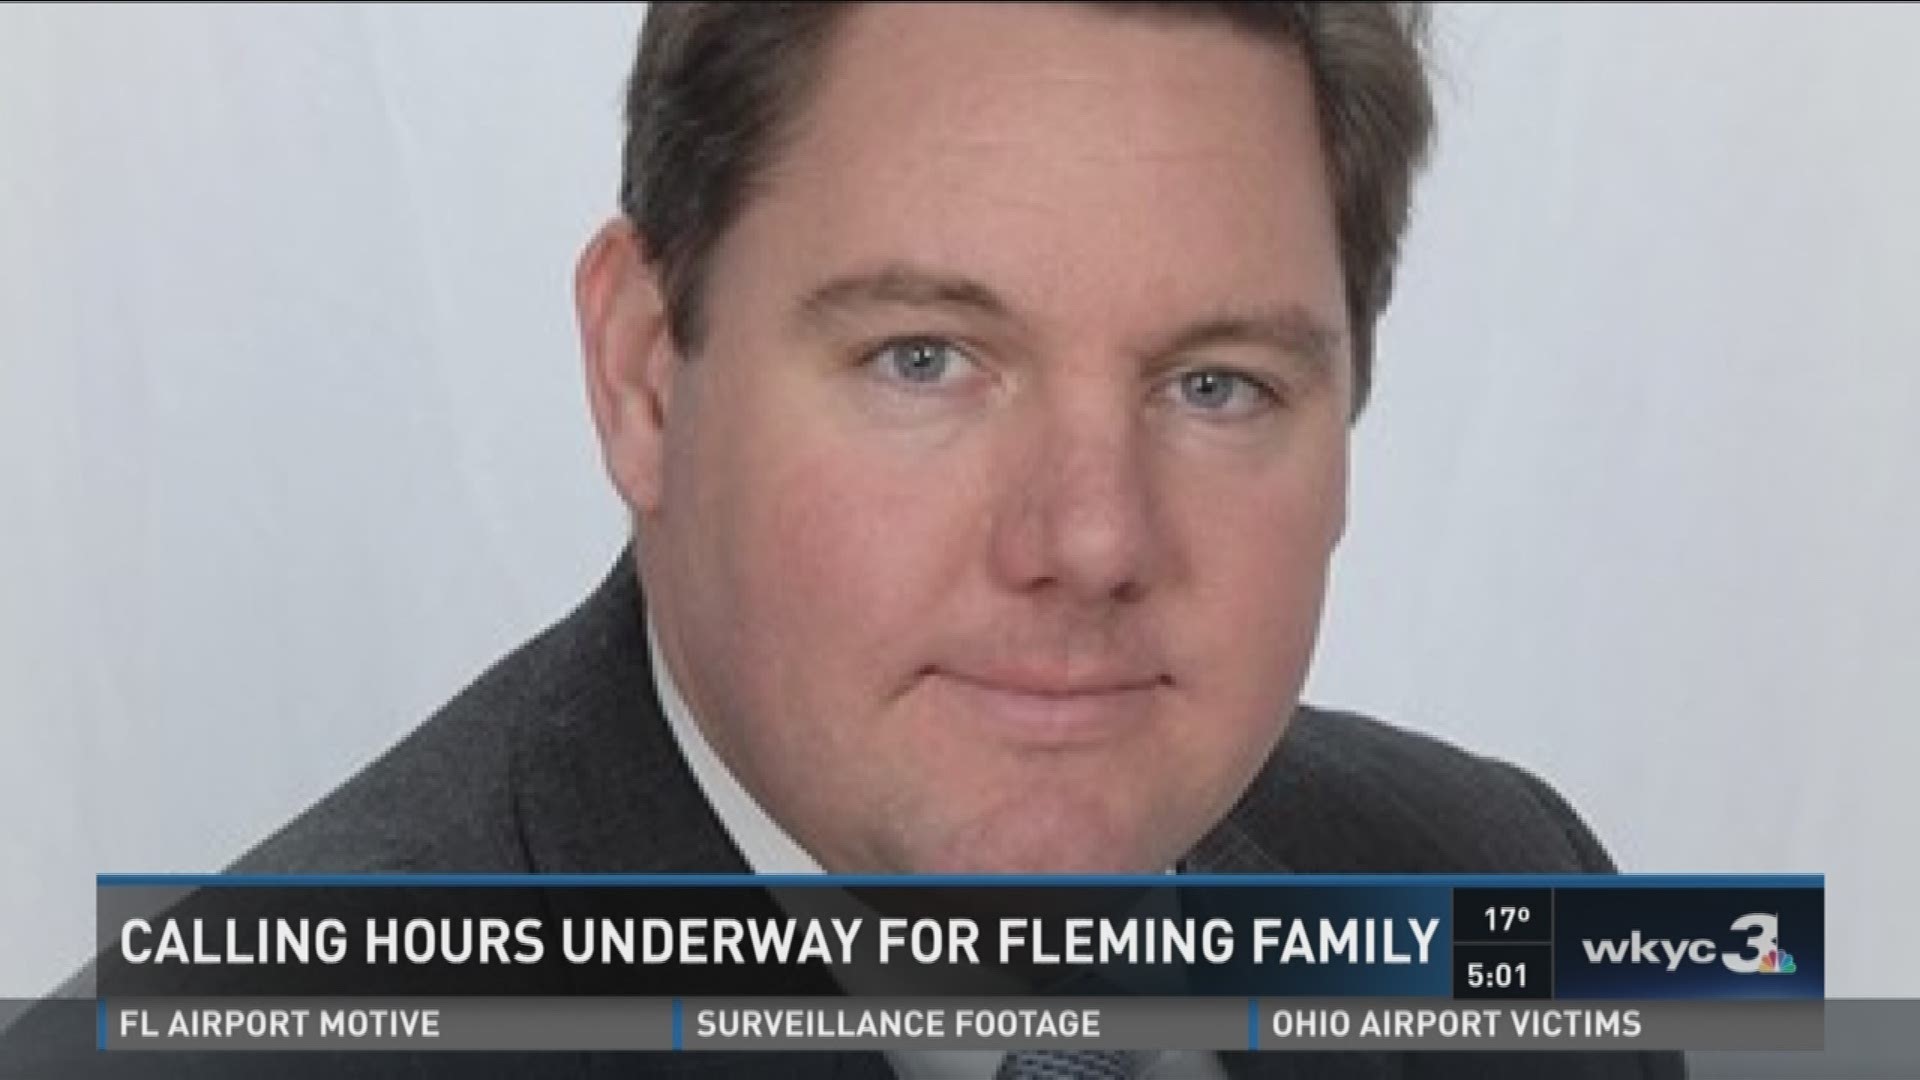 Calling hours underway for Fleming family